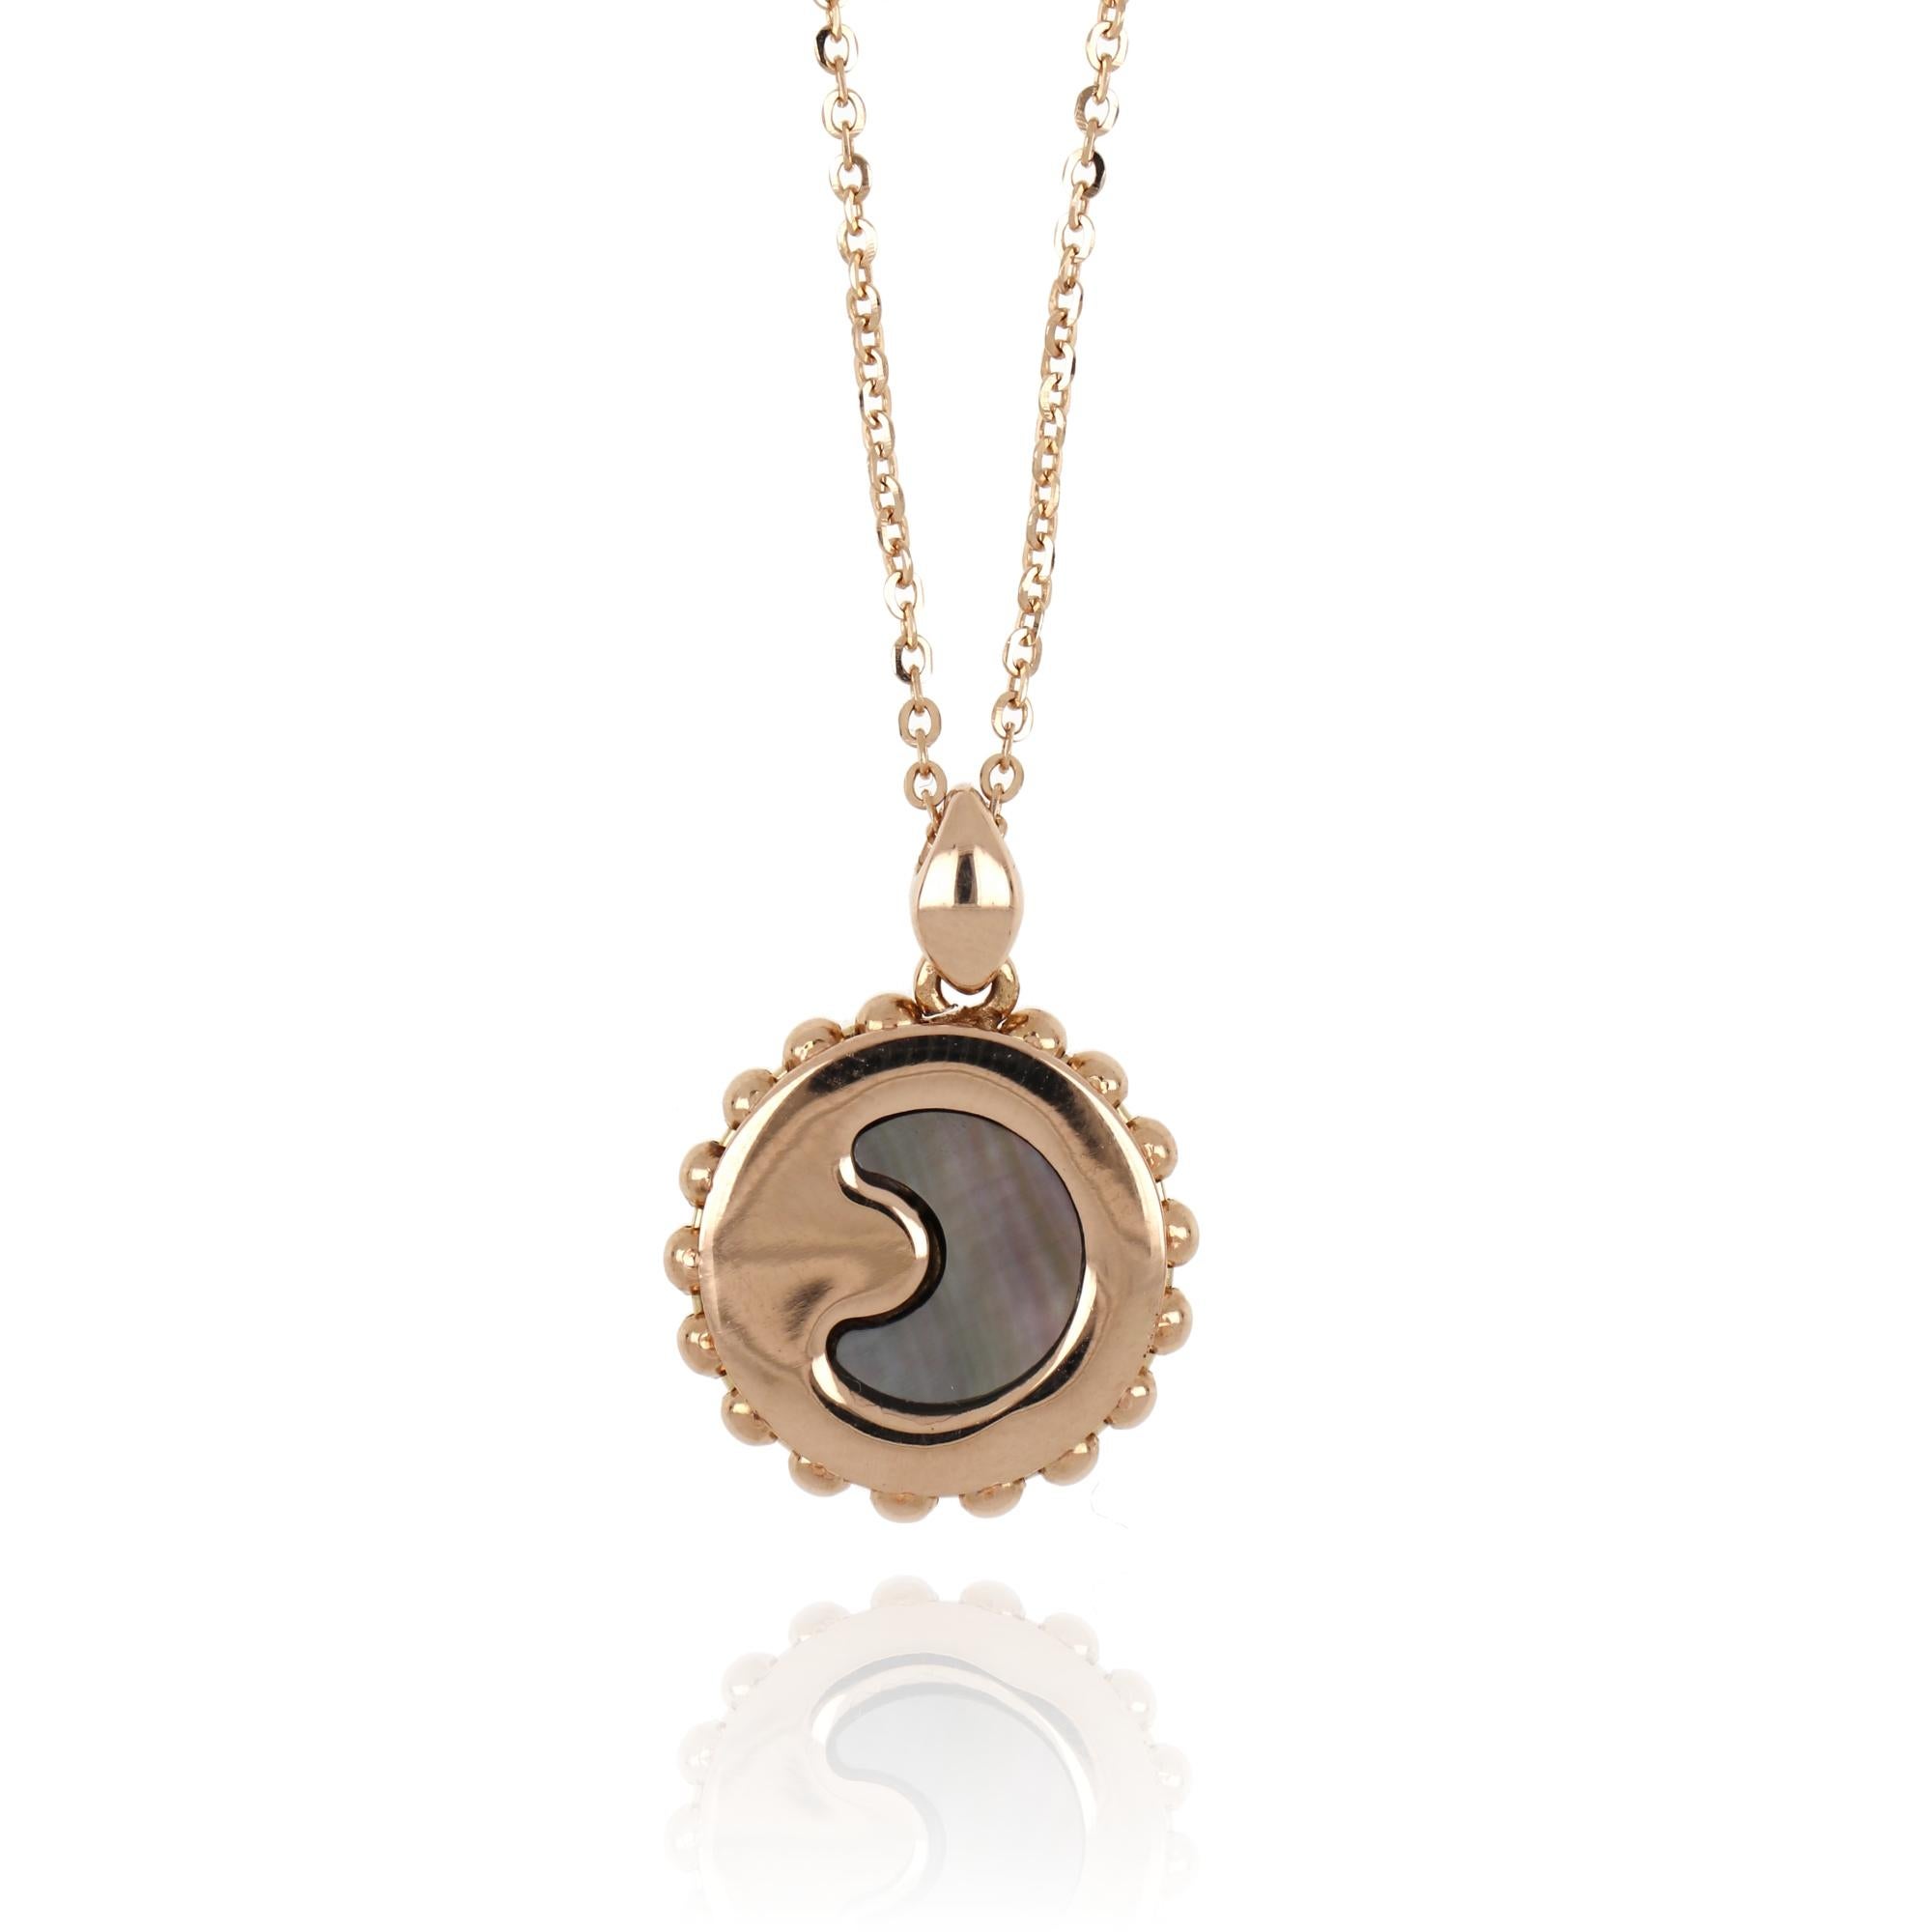 Romantic and effortlessly chic, this necklace is the perfect complement to an evening attire and will surprise you with its playful design. On one side the pendant features a central crescent moon shape in mother-of-pearl, framed by pavé set